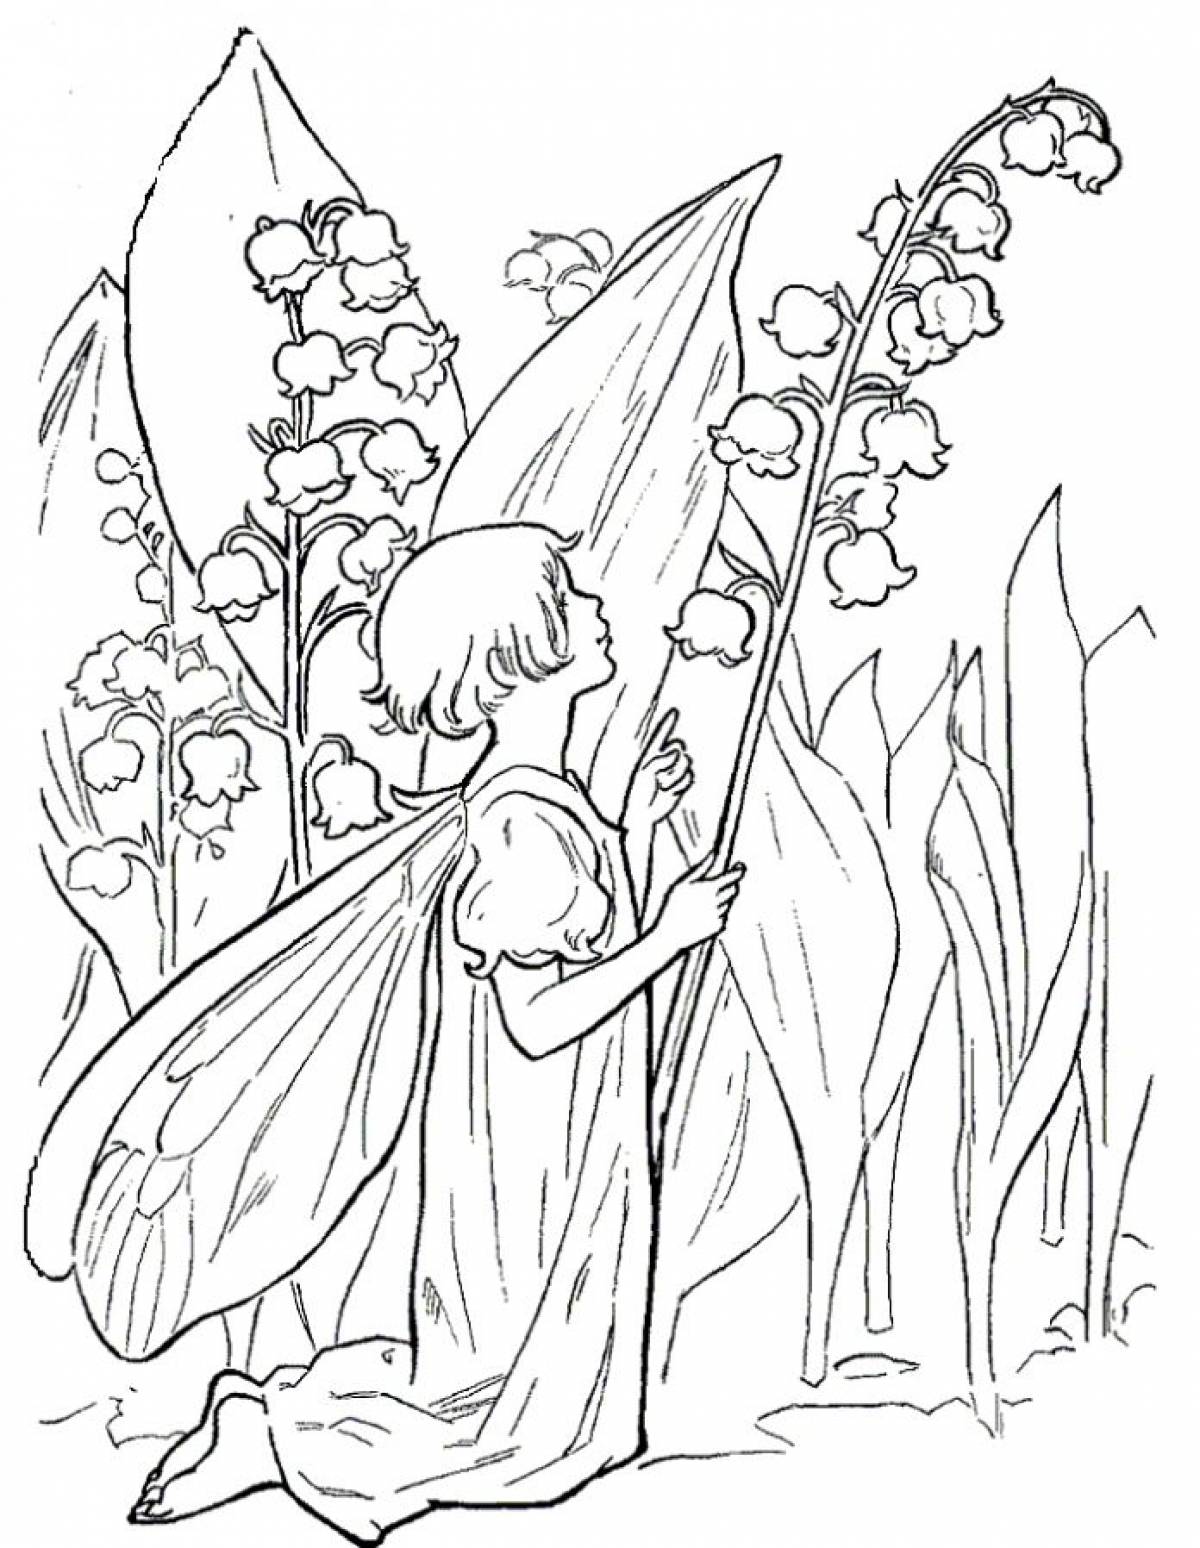 Lily of the valley with a fairy